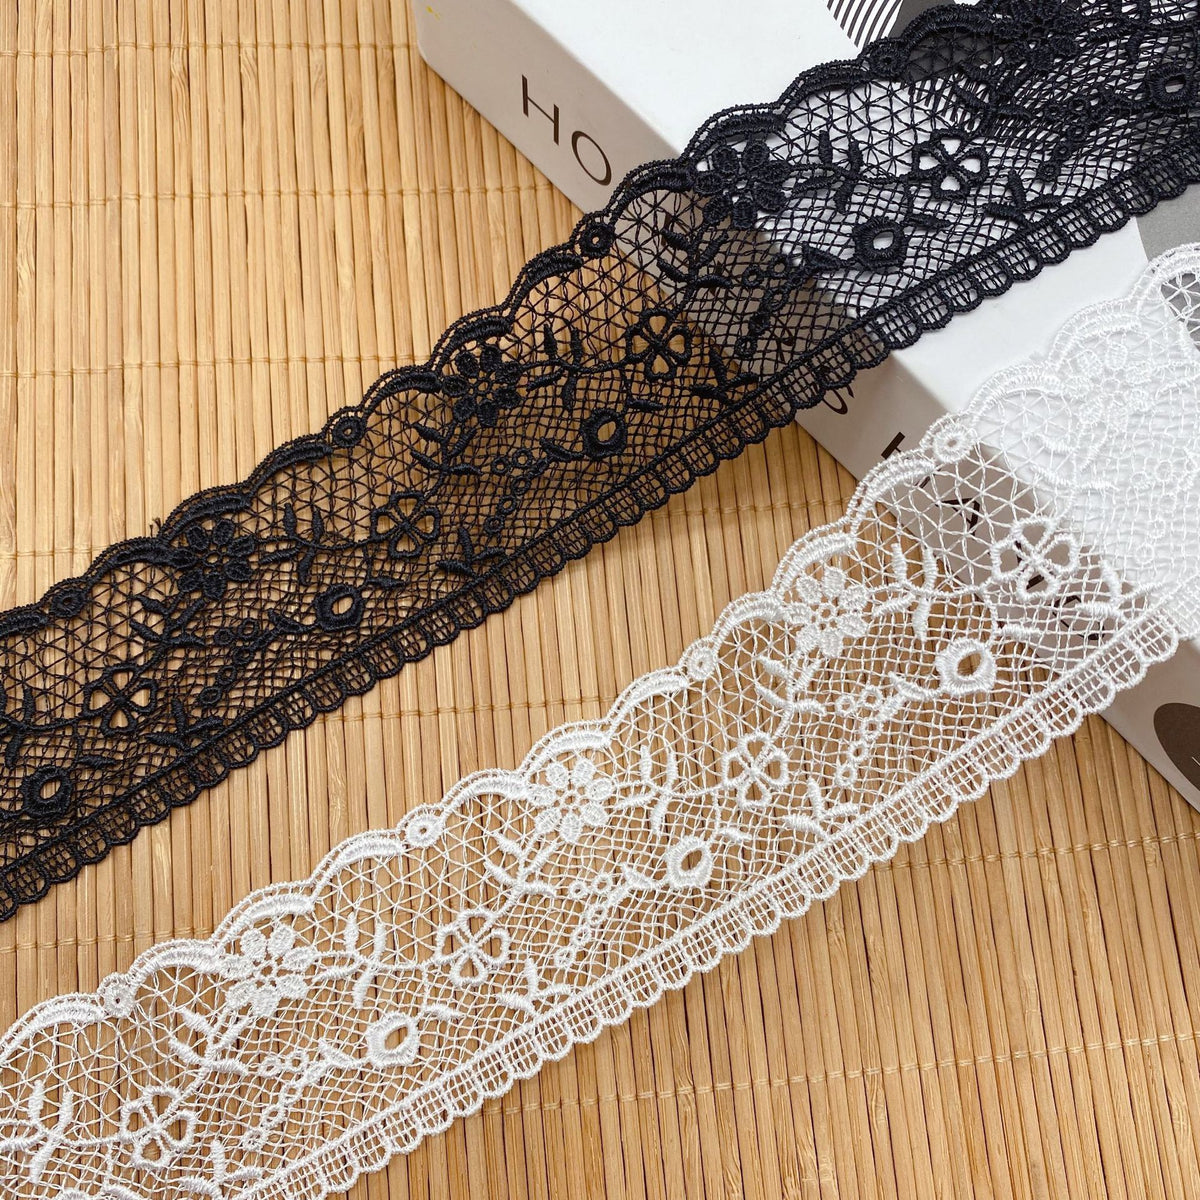 High Quality 10 Yards Of Beautiful Stones Lace Tape With 75MM Trim For DIY  Embroidery, Sewing, And African Fabric Trim Decoration From Lvitsss, $32.47